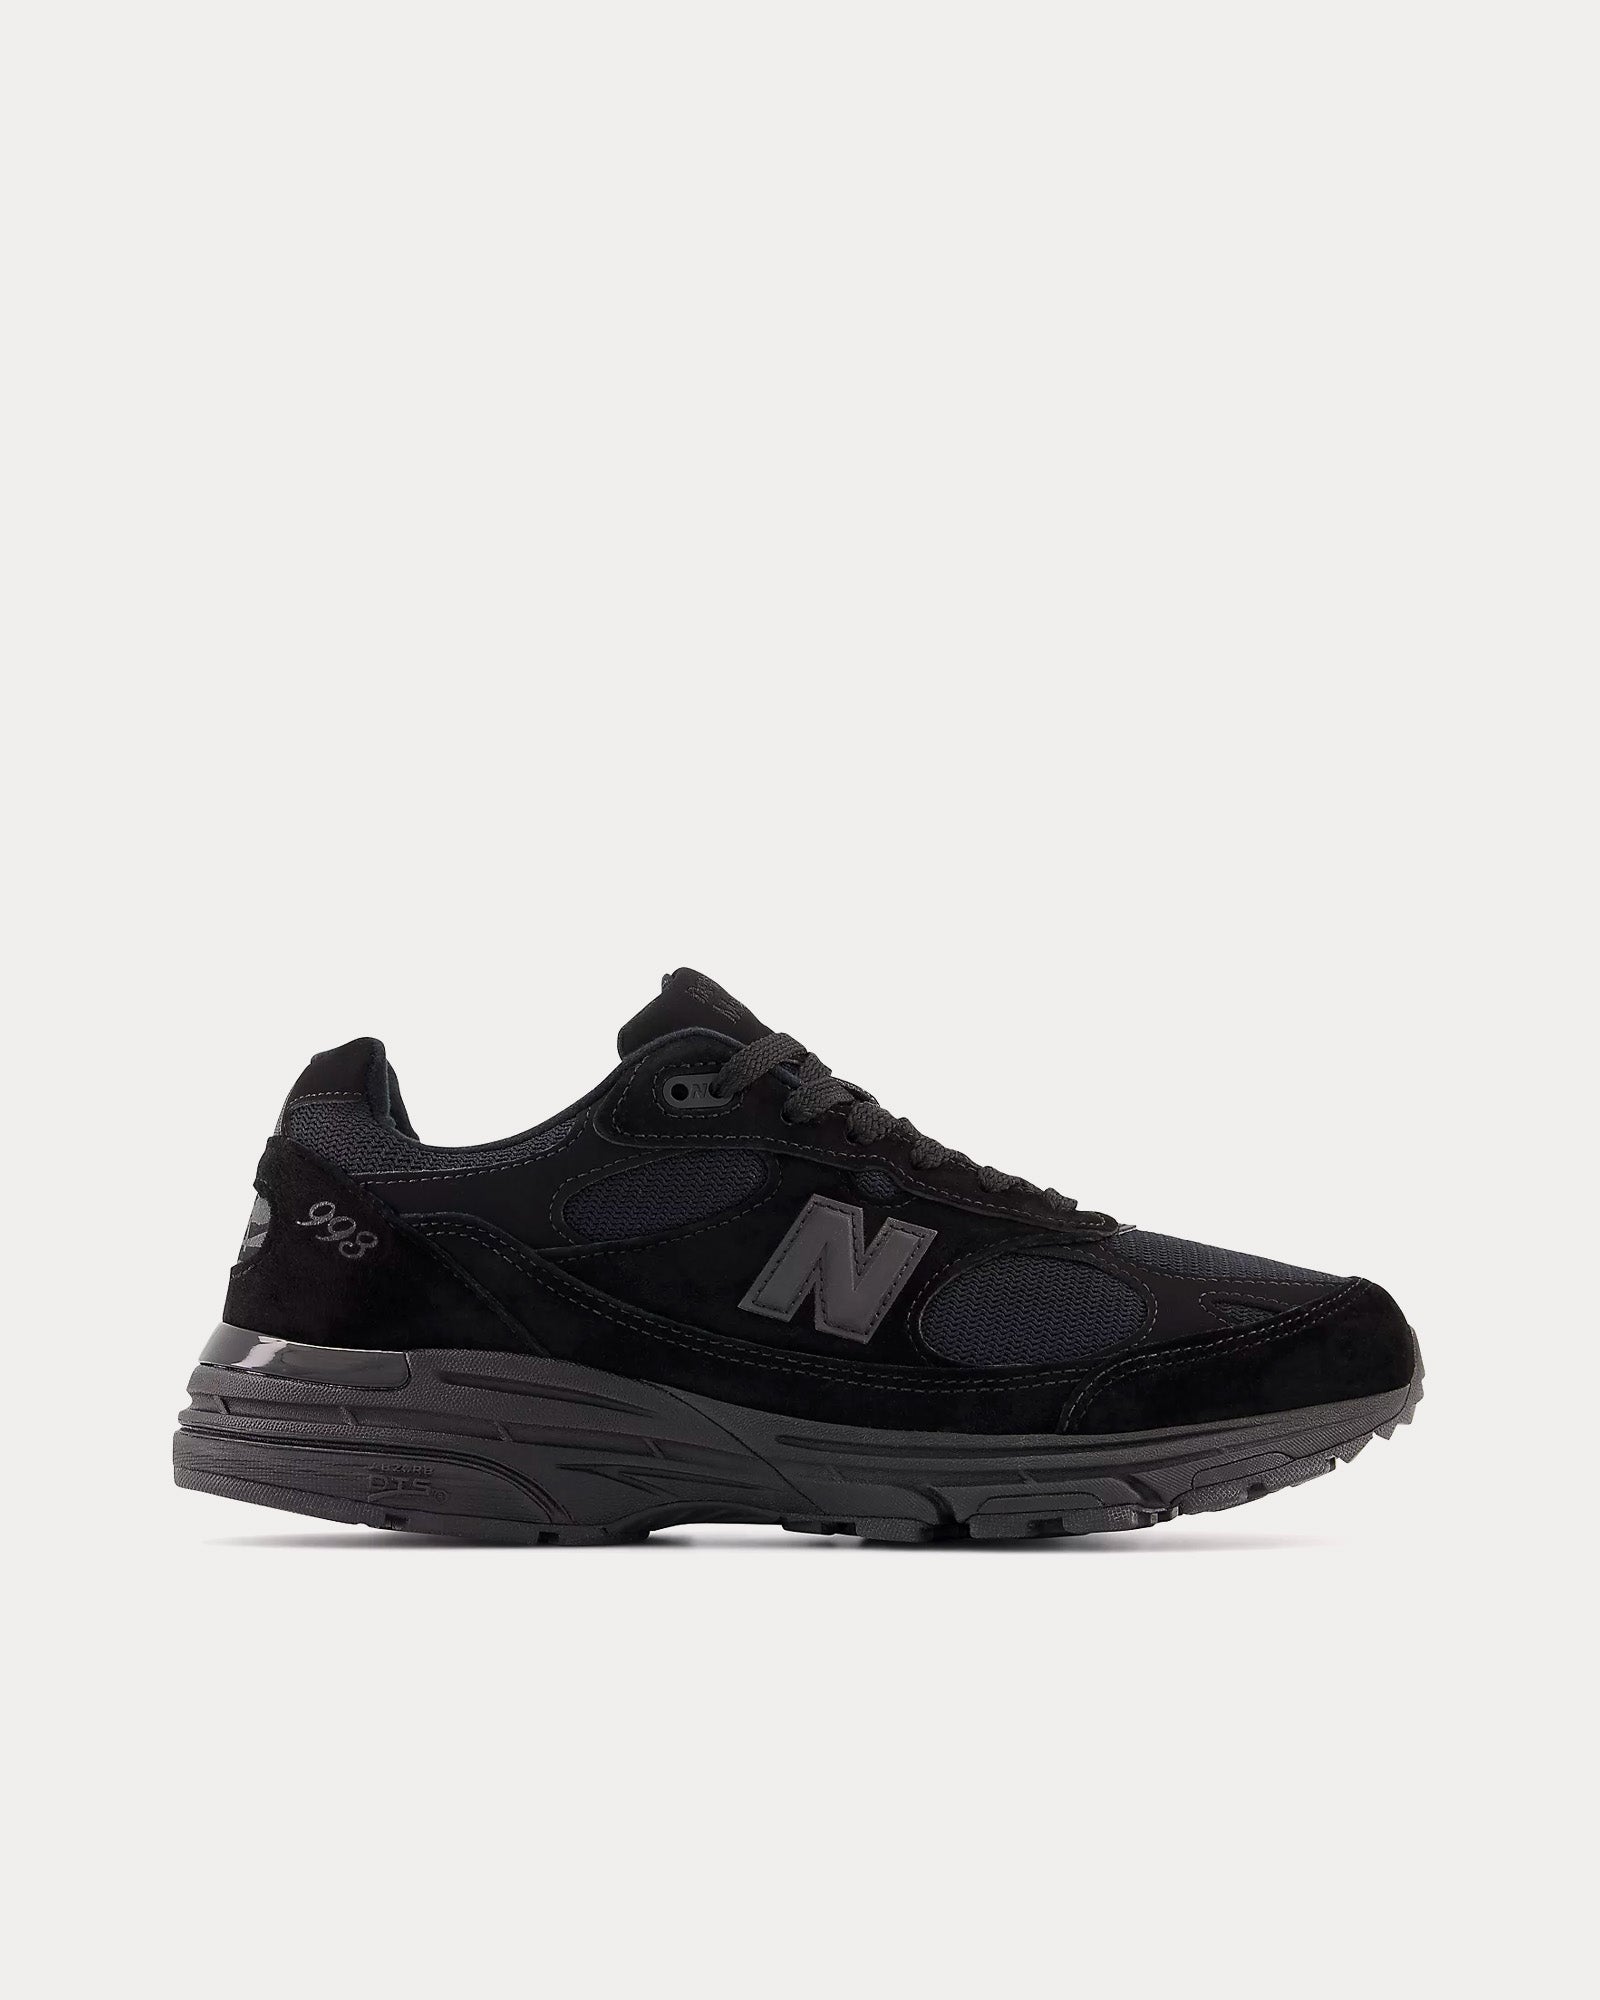 New Balance Made in USA 993 Black Low Top Sneakers - Sneak